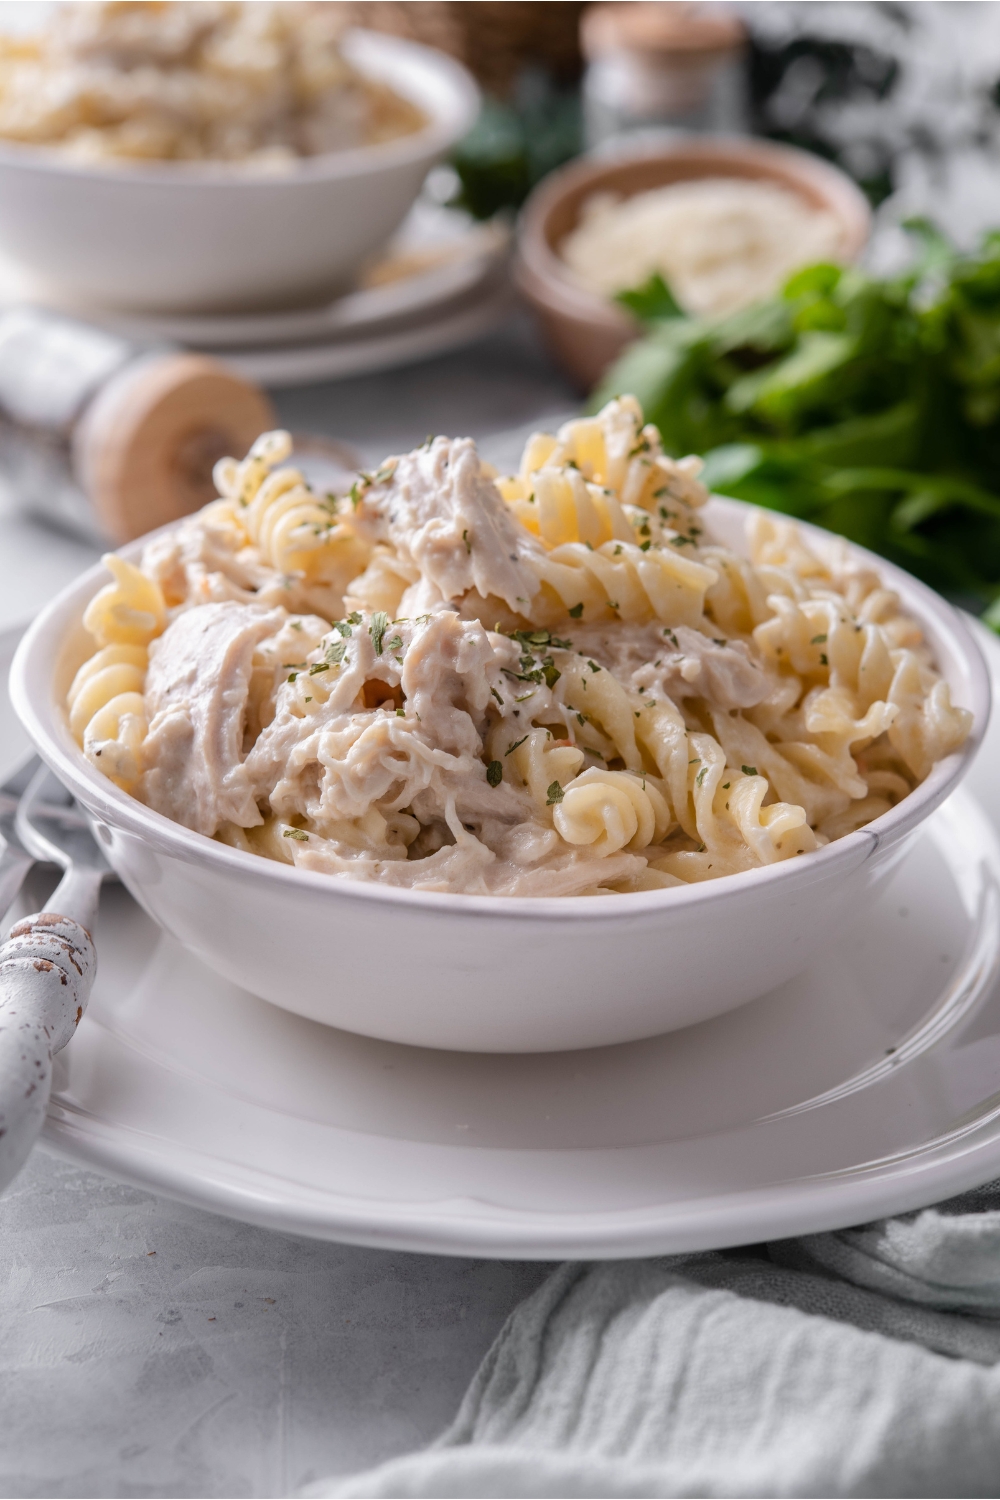 A bowl of pasta and chicken in a cream sauce atop a white plate with a fork next to the bowl and a second bowl of pasta in the background.